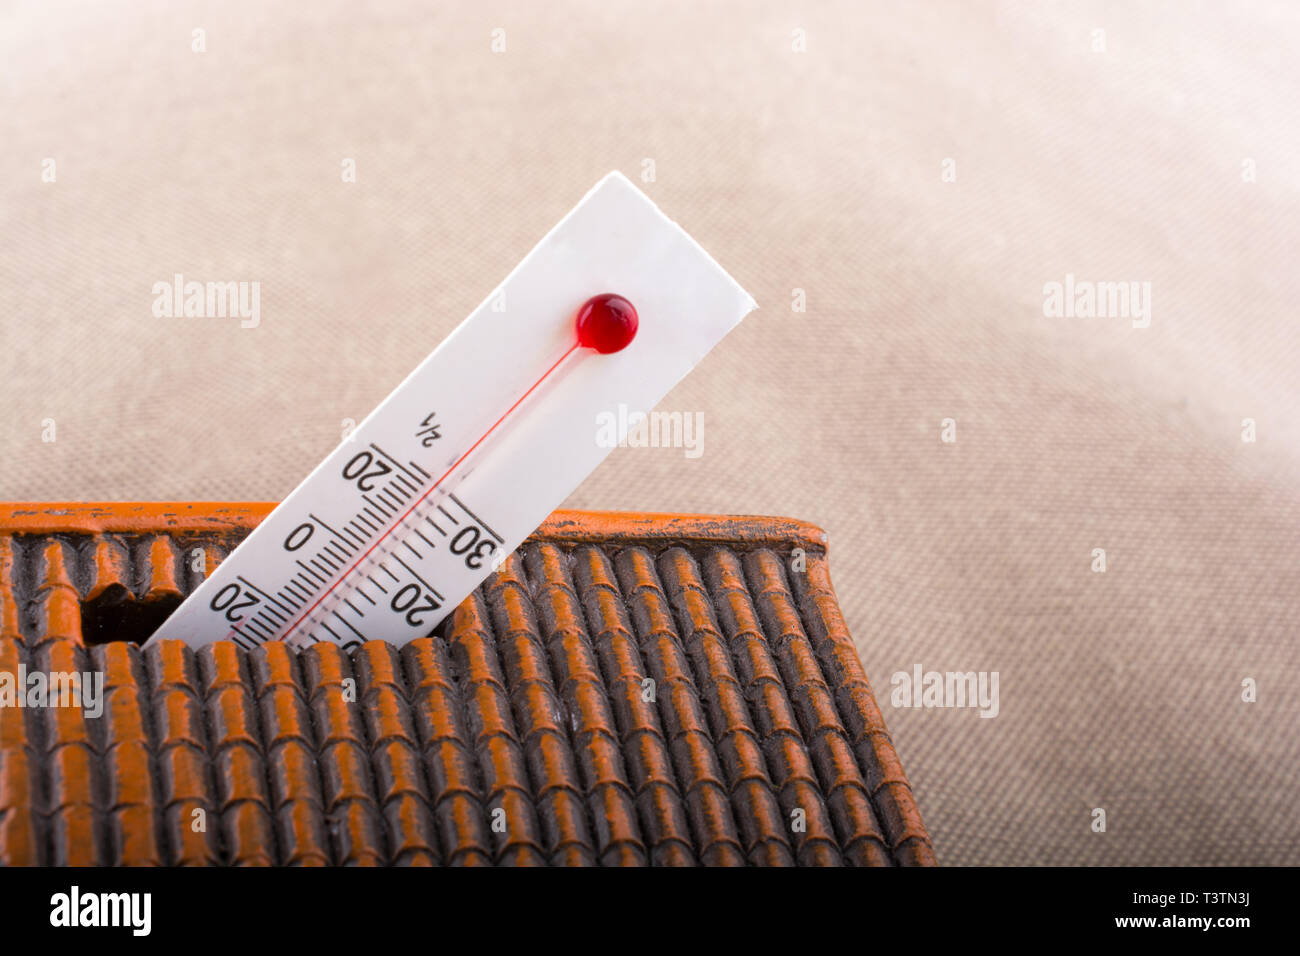 https://c8.alamy.com/comp/T3TN3J/thermometer-measuring-high-temperature-placed-on-a-little-model-house-T3TN3J.jpg